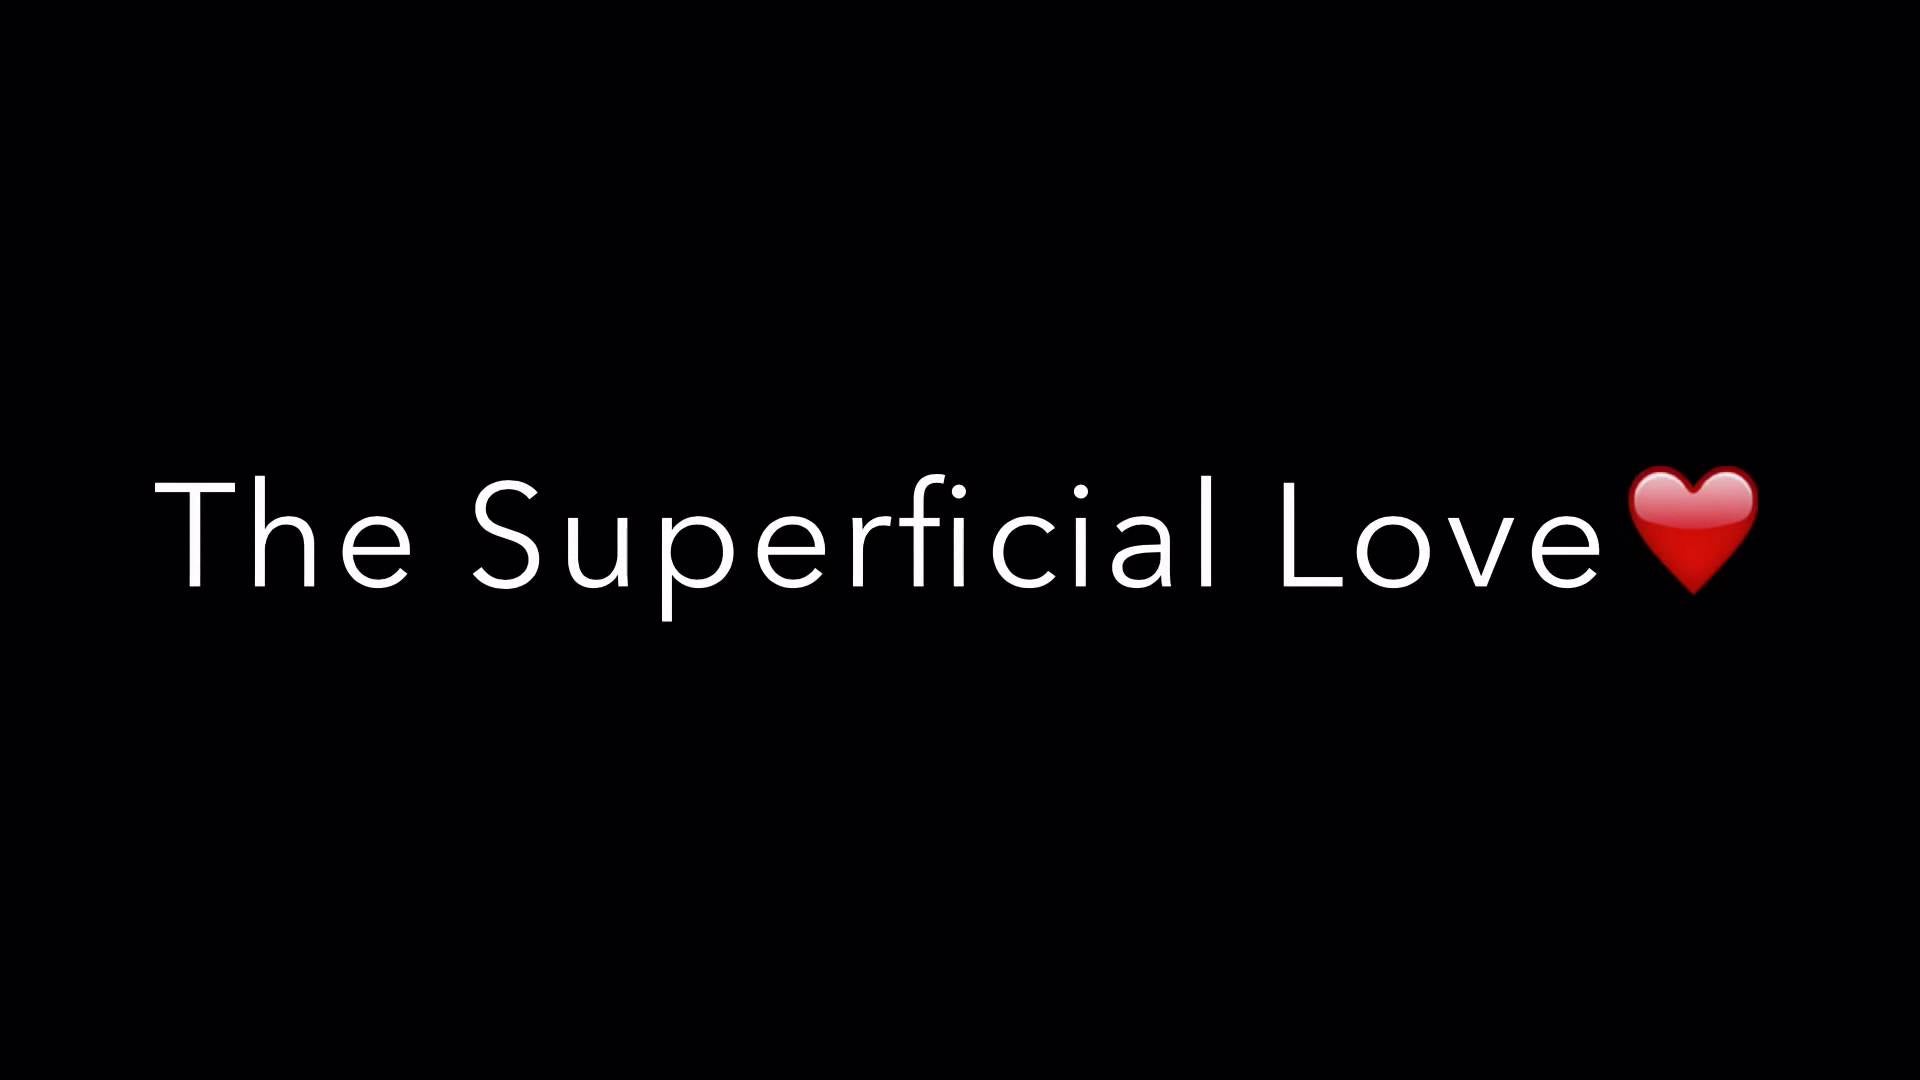 The Superficial Love